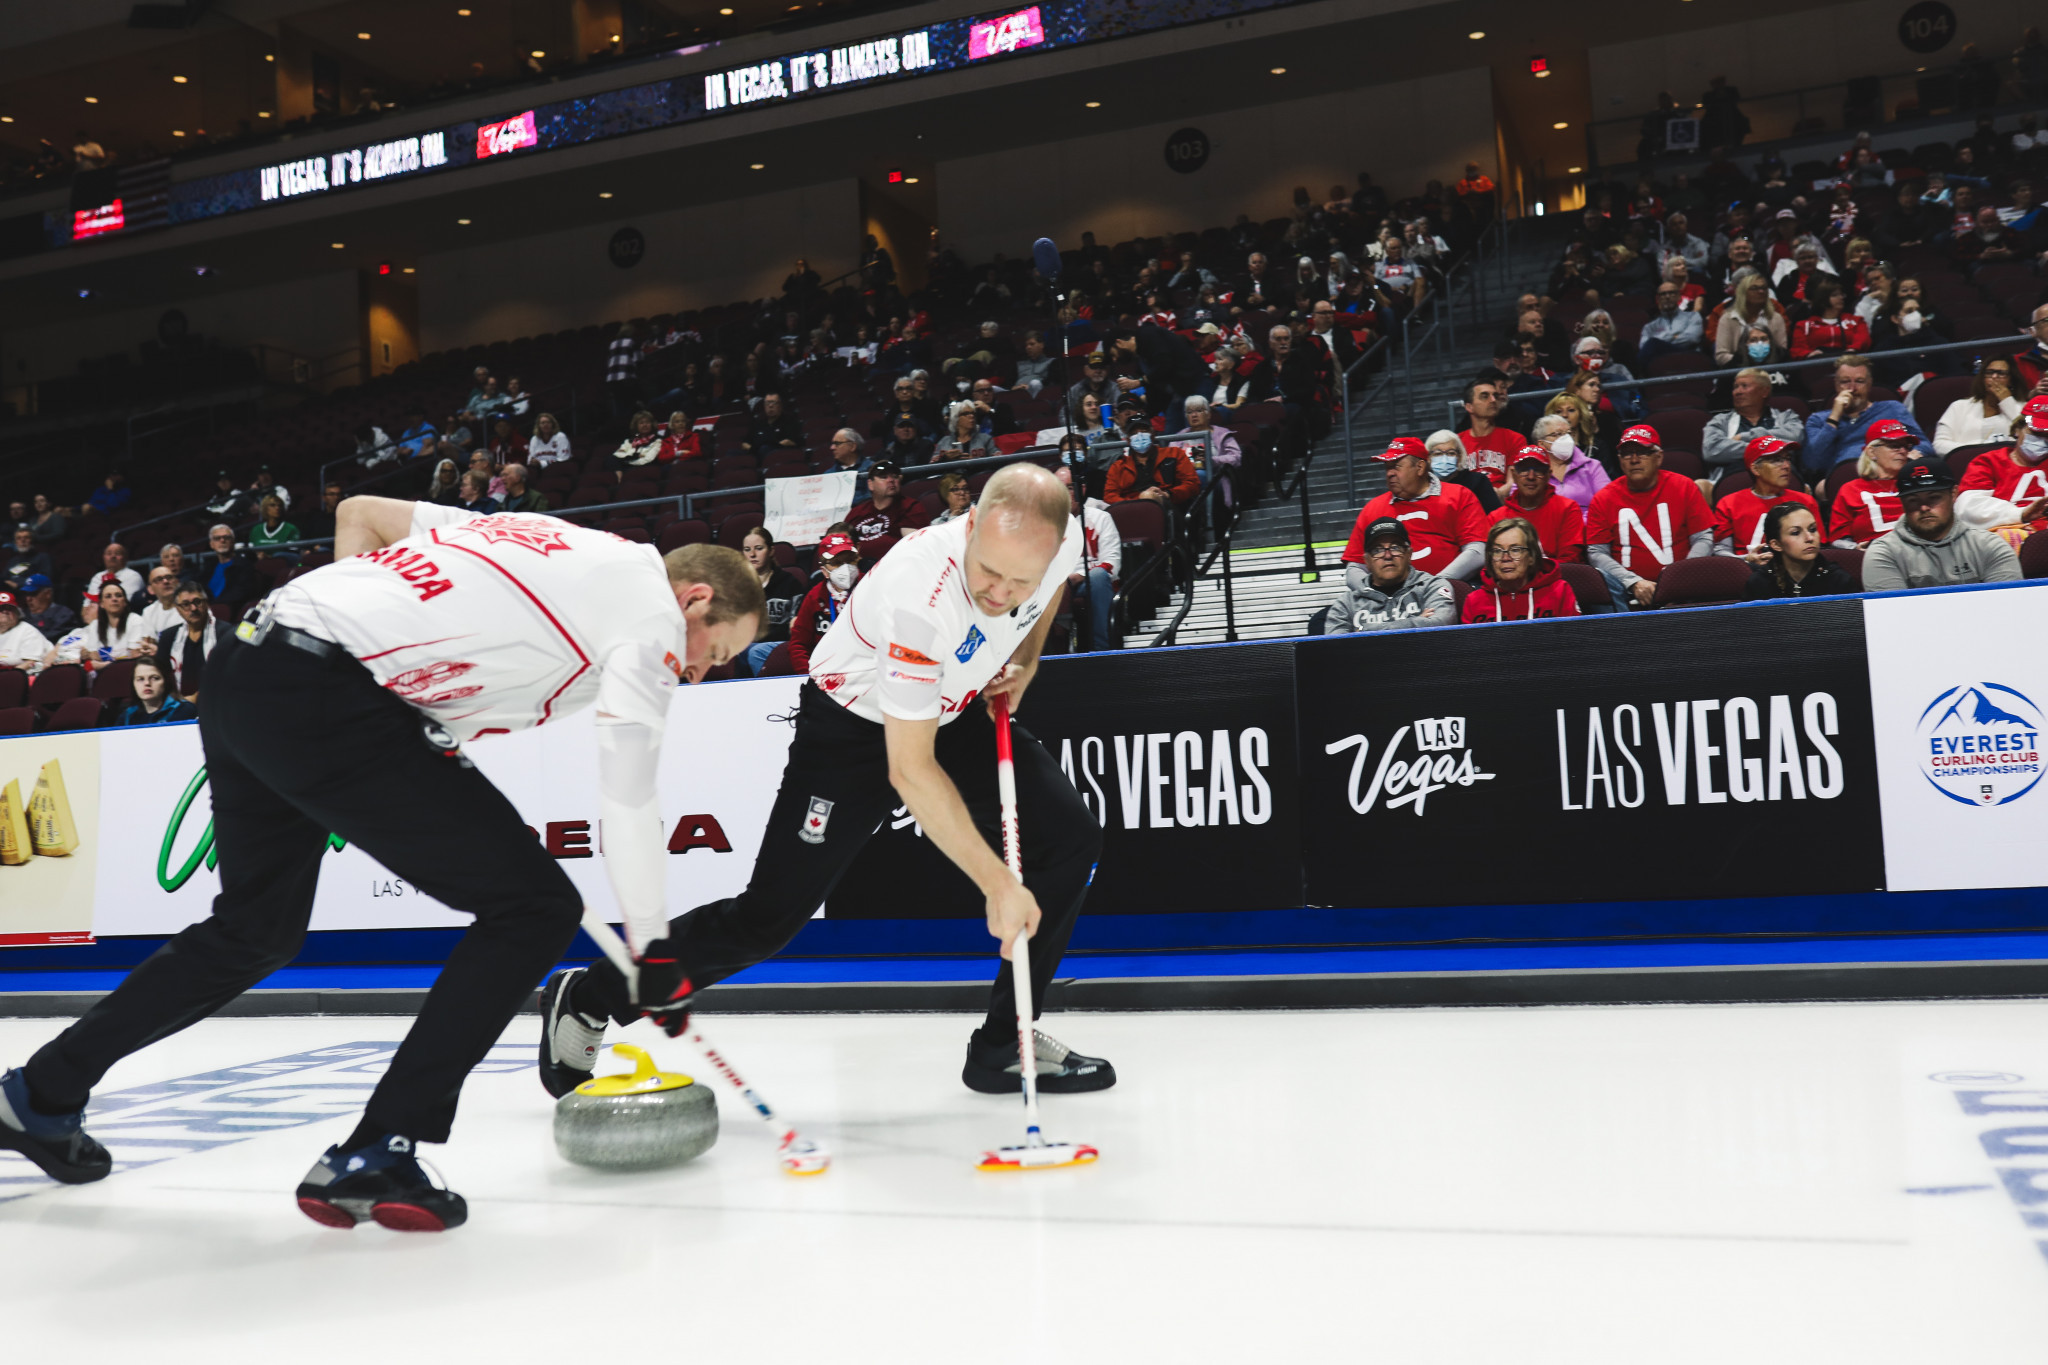 Sweden and Canada qualify for World Men's Curling Championship playoffs